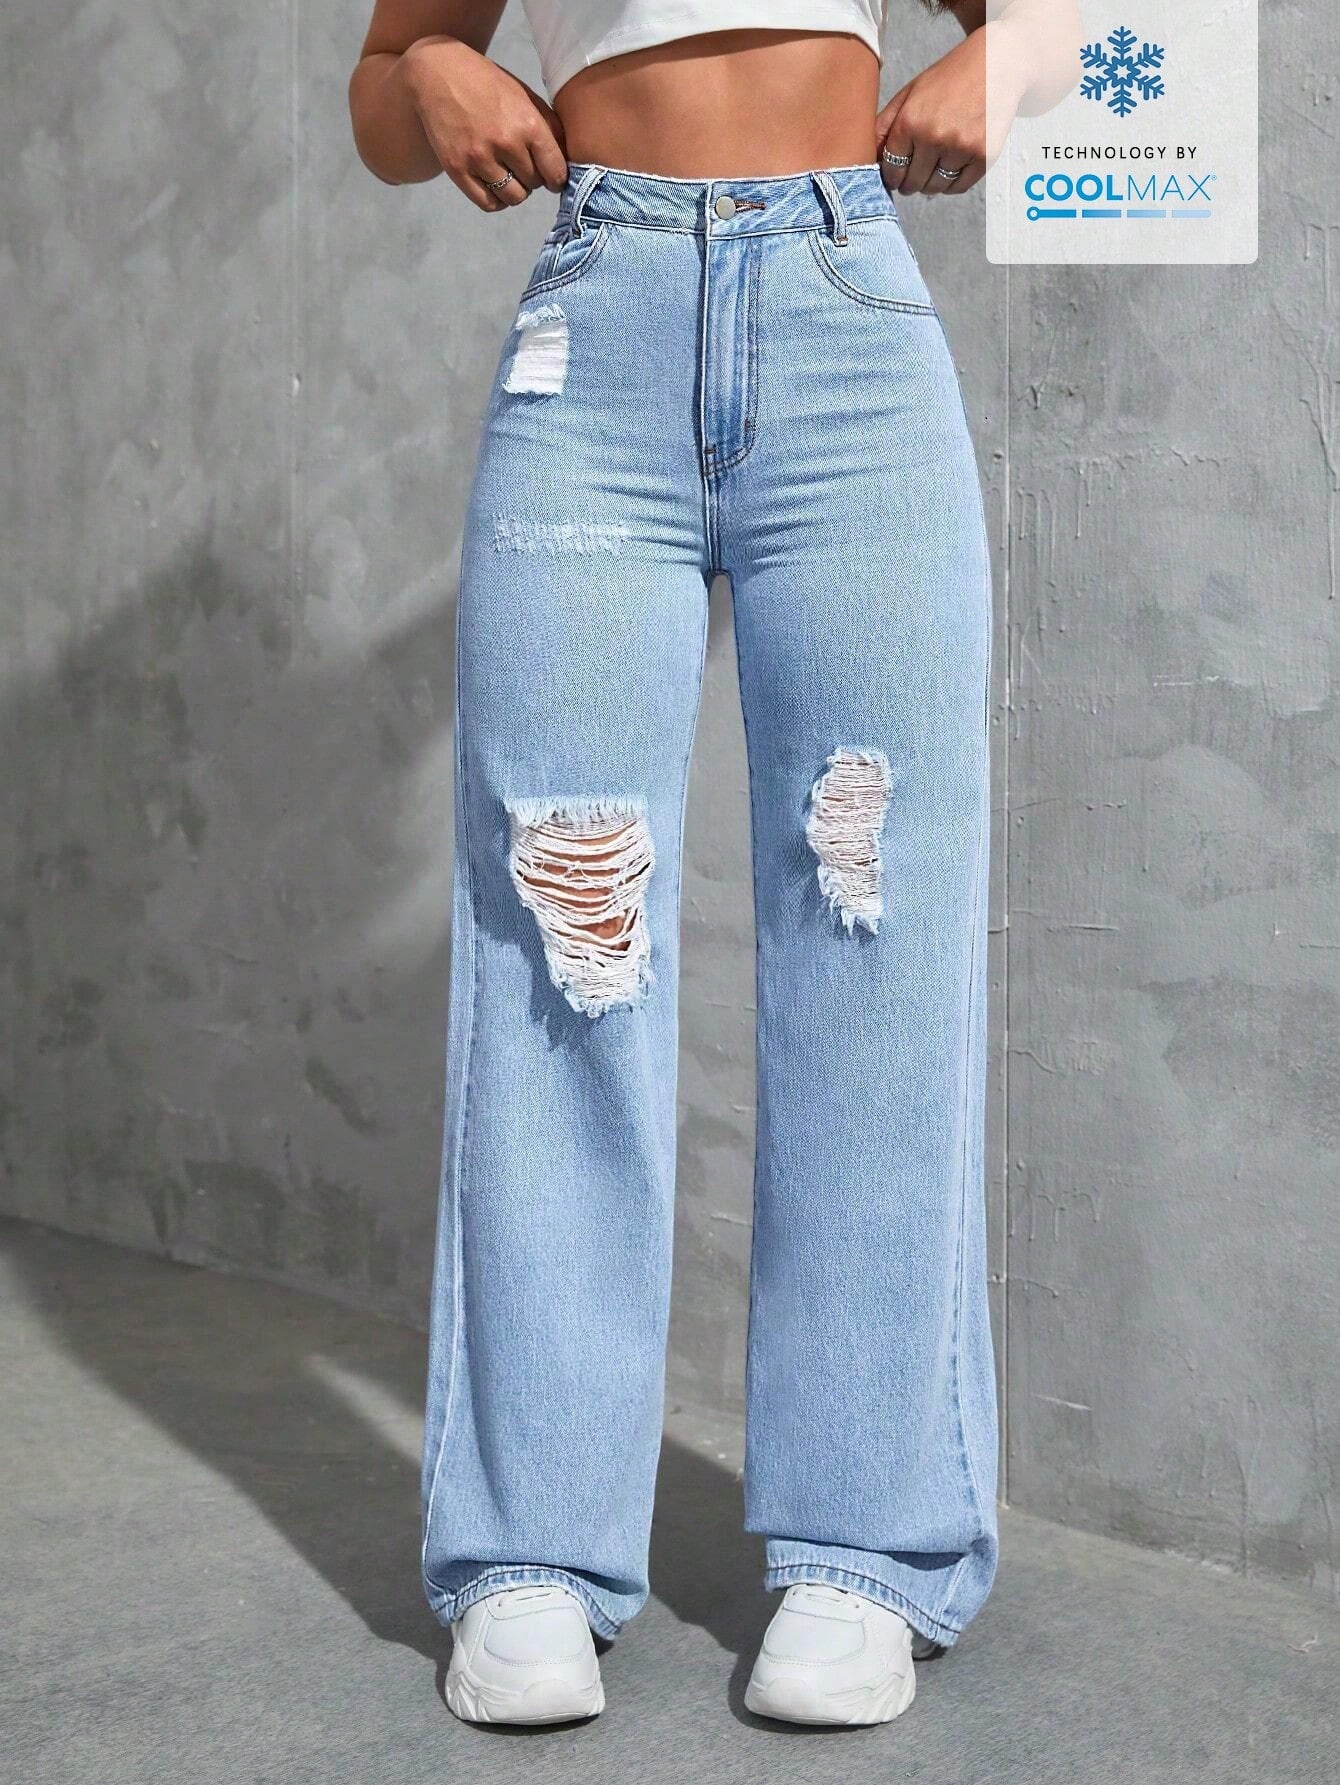 Coolmax Solid Color Straight Leg Jeans With Distressed Holes